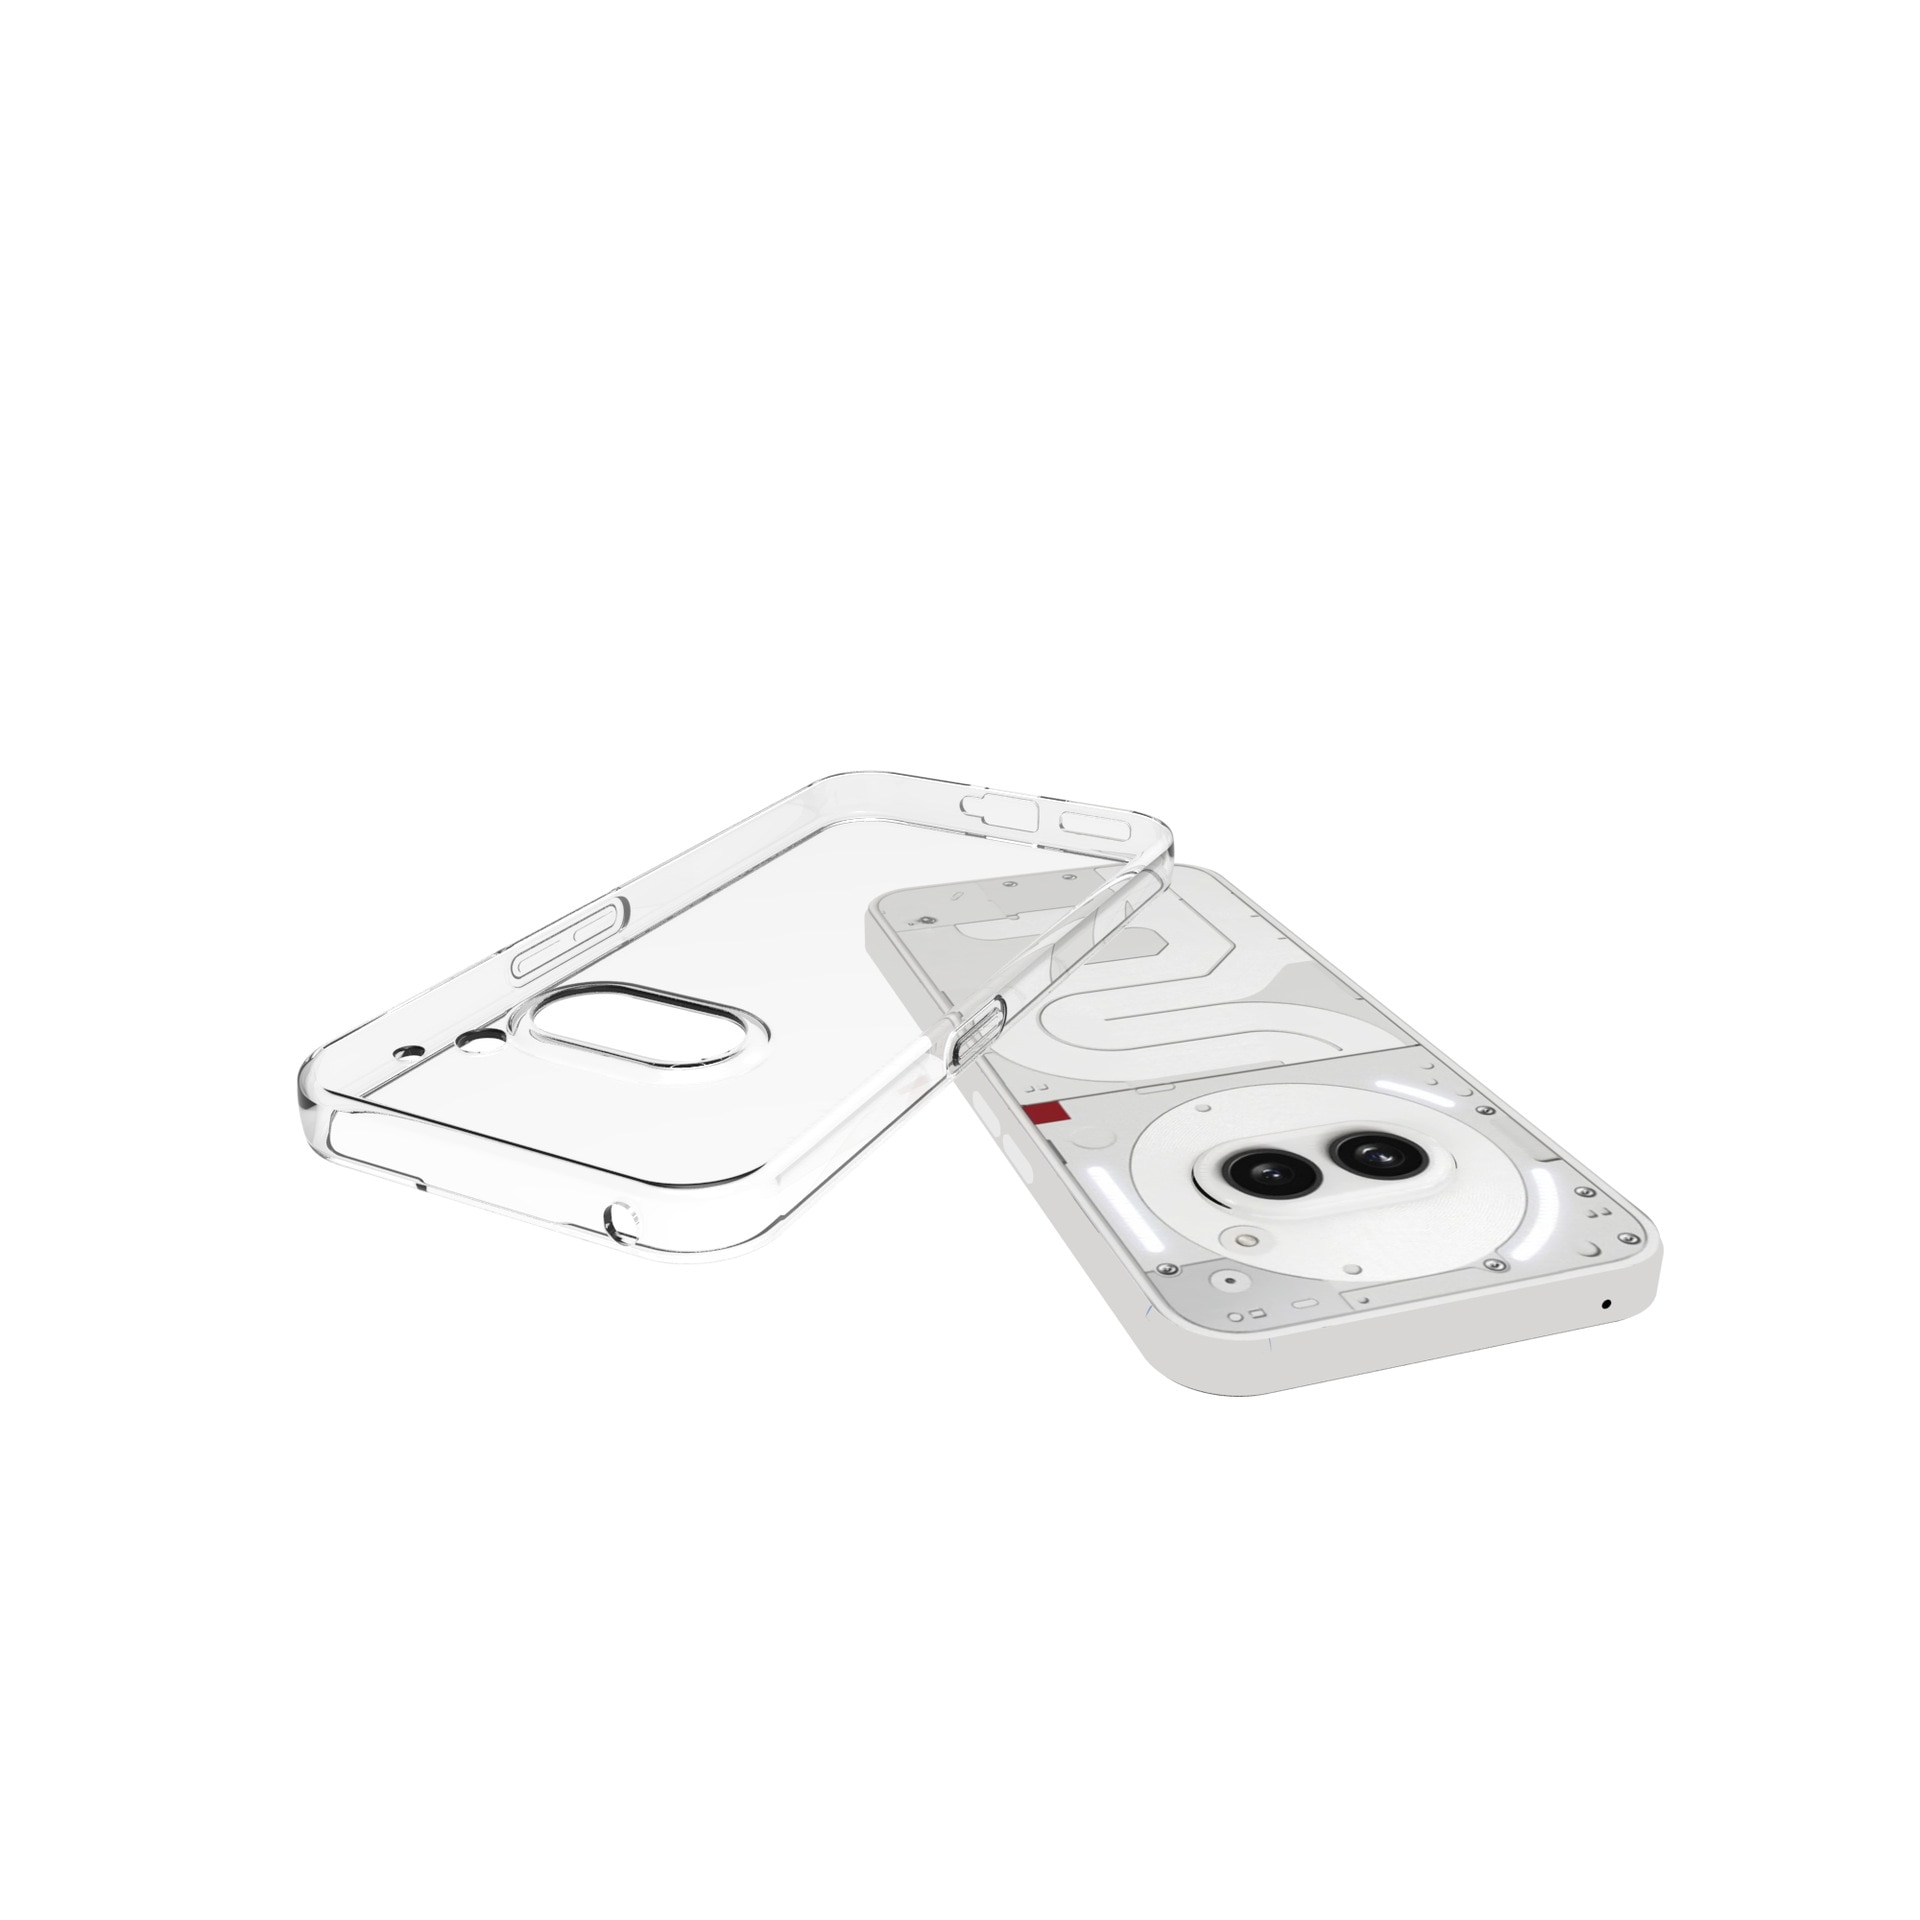 TPU Case Nothing Phone 2a Clear